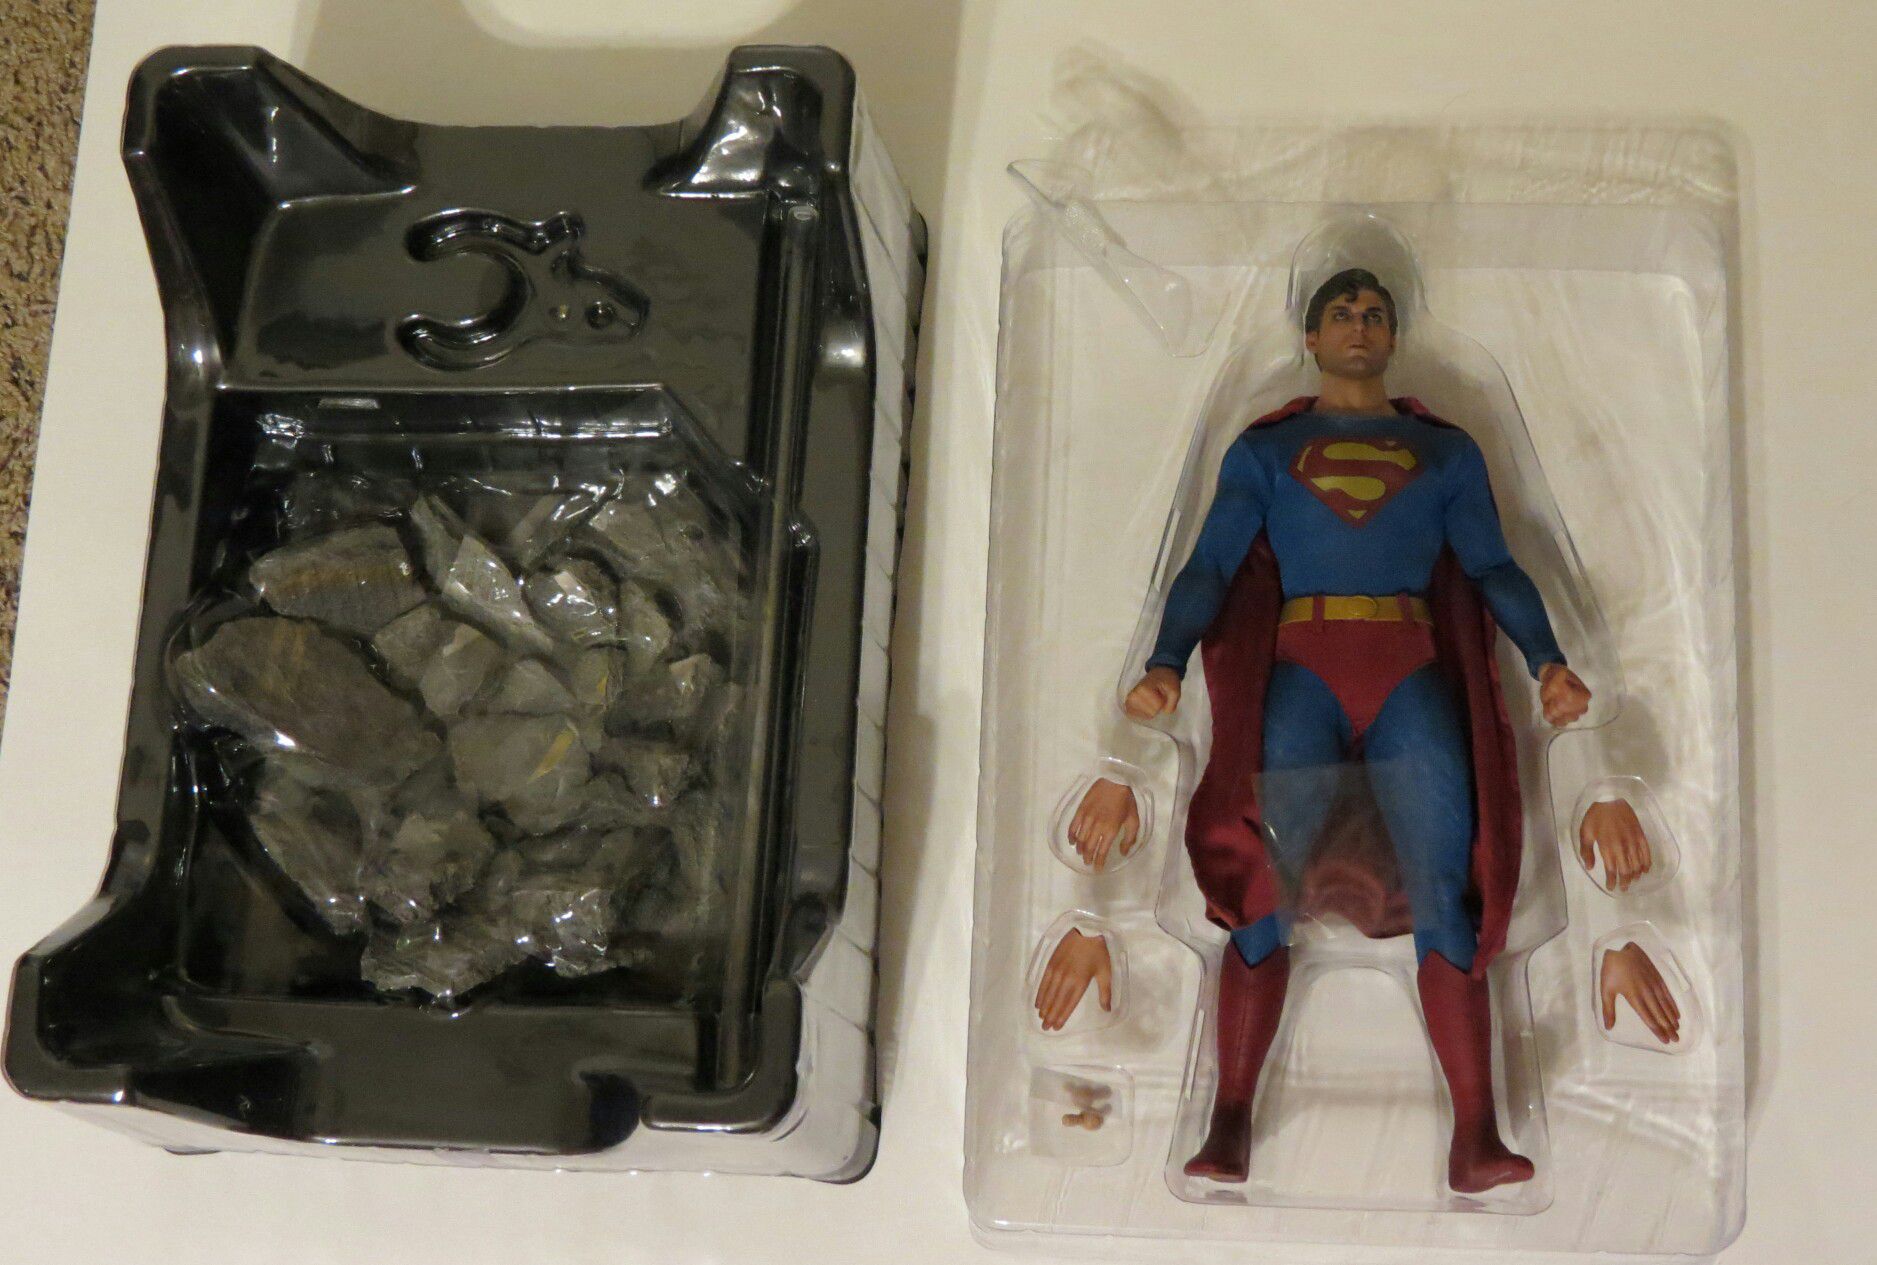 Hot Toys Superman Christopher Reeve figure Evil exclusive